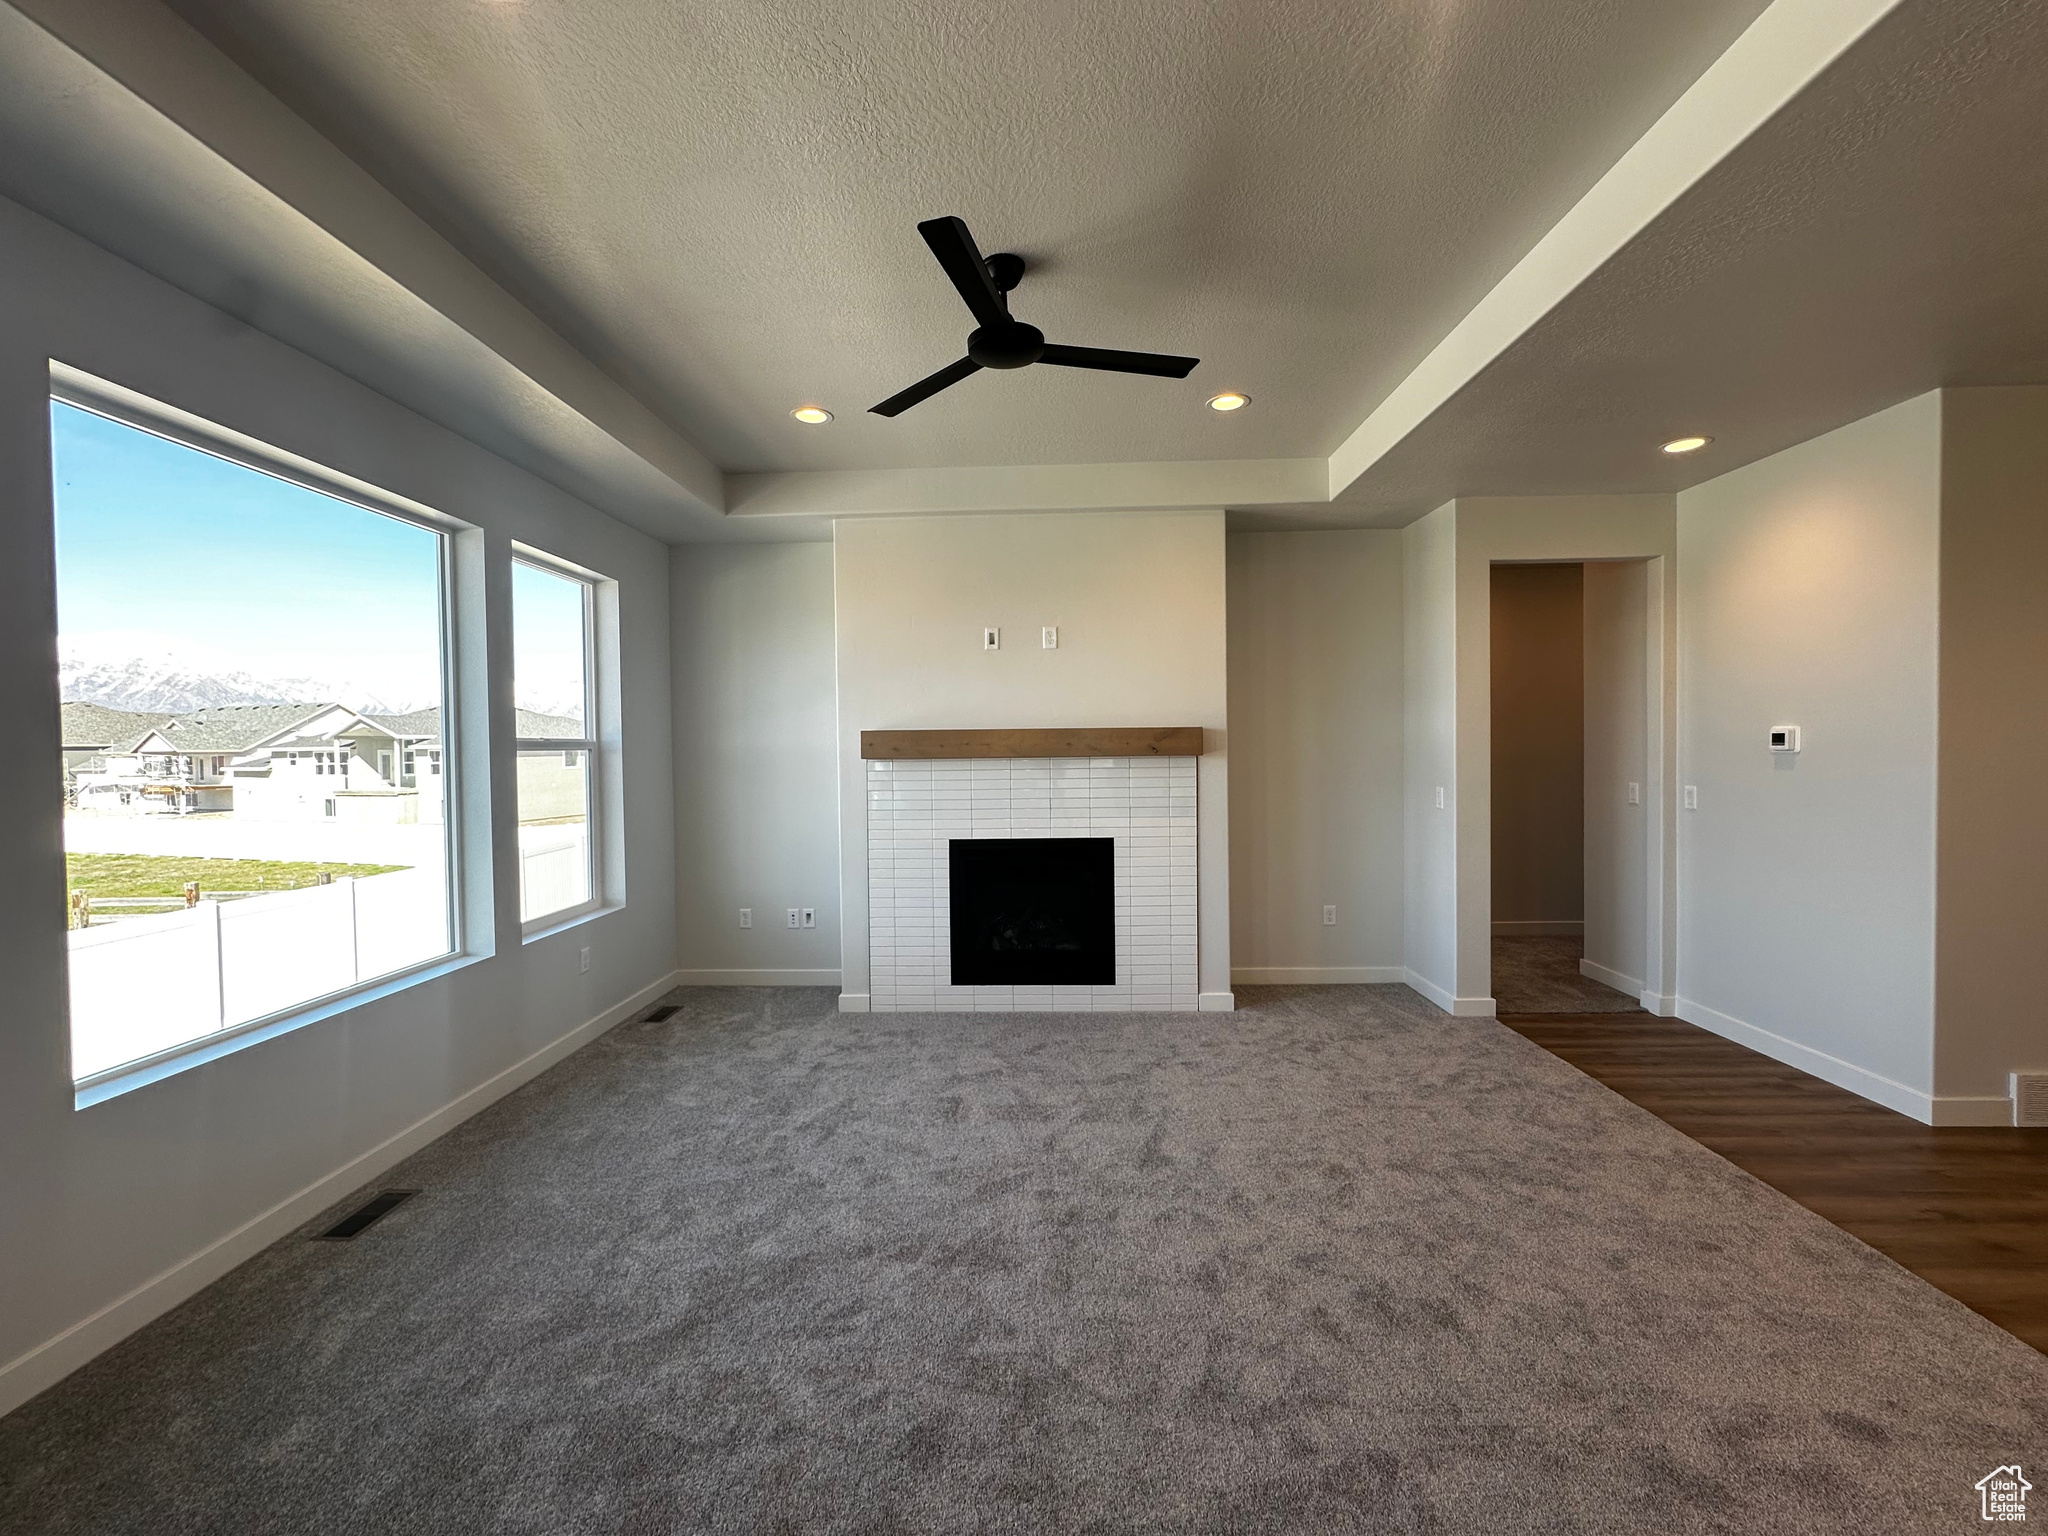 Unfurnished living room featuring a brick fireplace, dark colored carpet, a raised ceiling, ceiling fan, and a textured ceiling